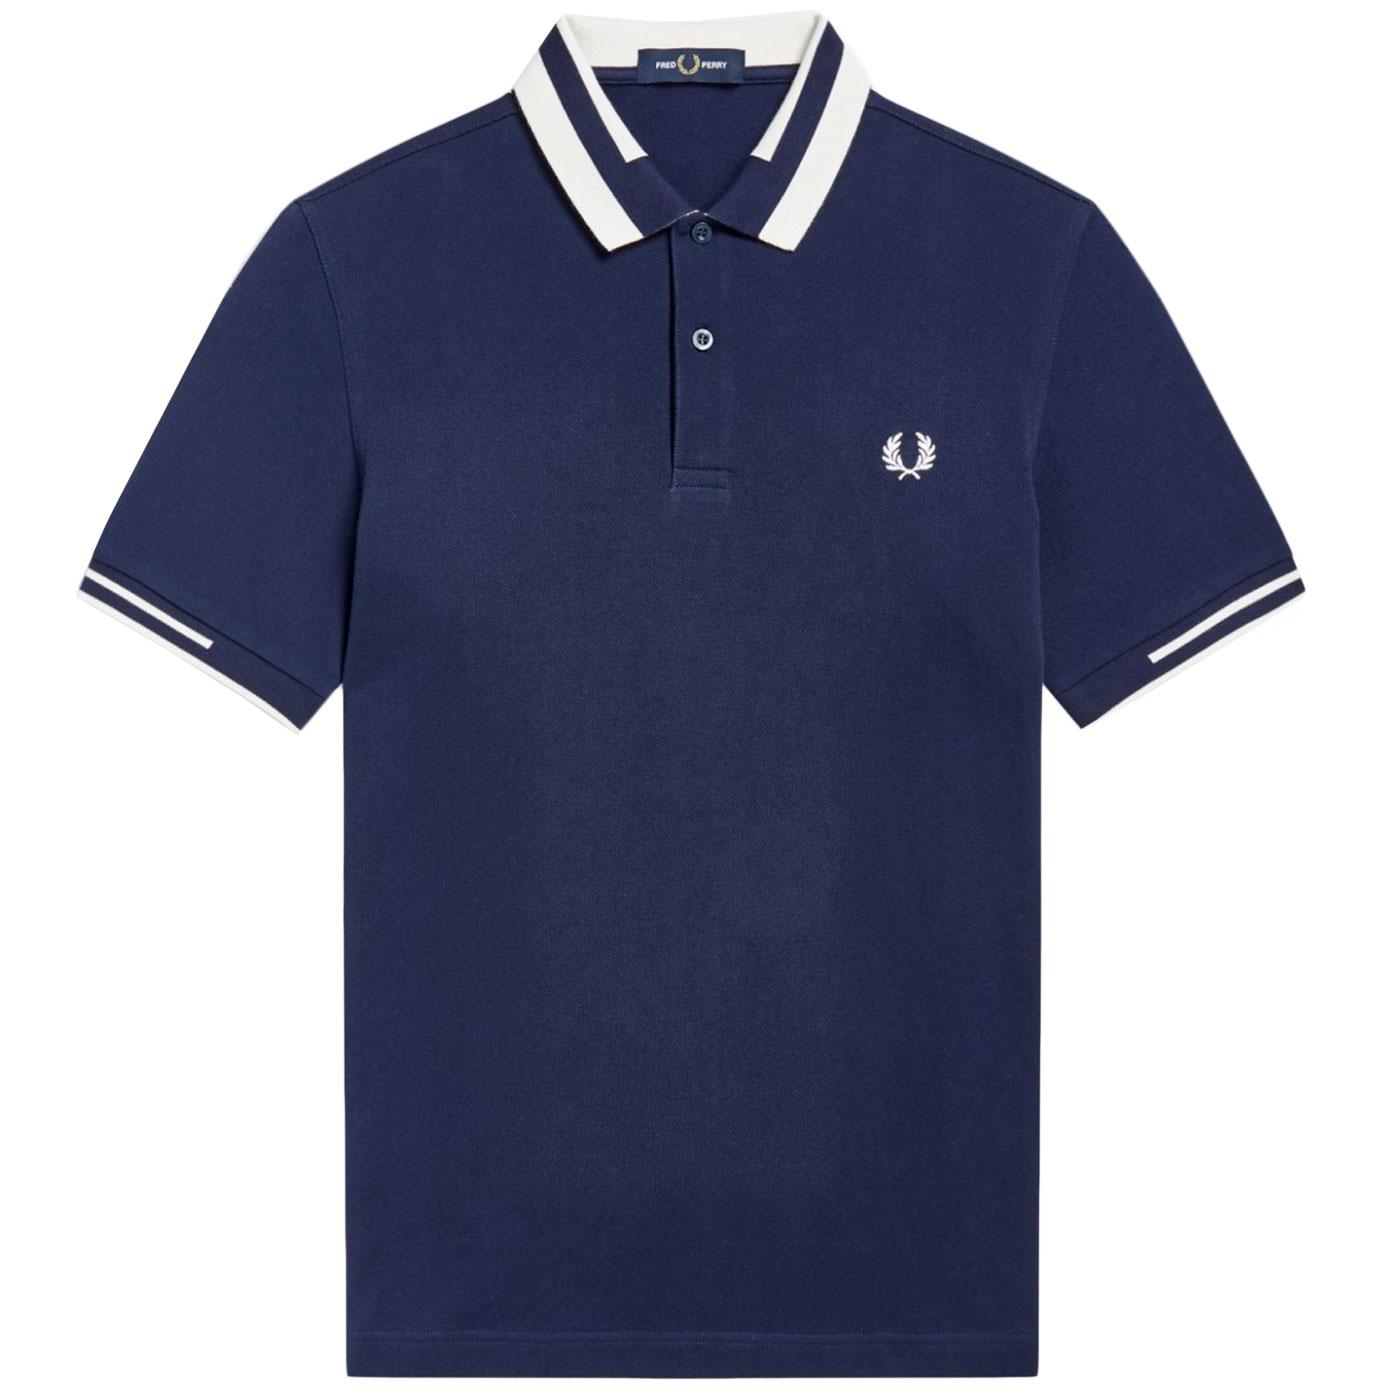 FRED PERRY Bold Tipped Retro Mod Pique Polo in Carbon